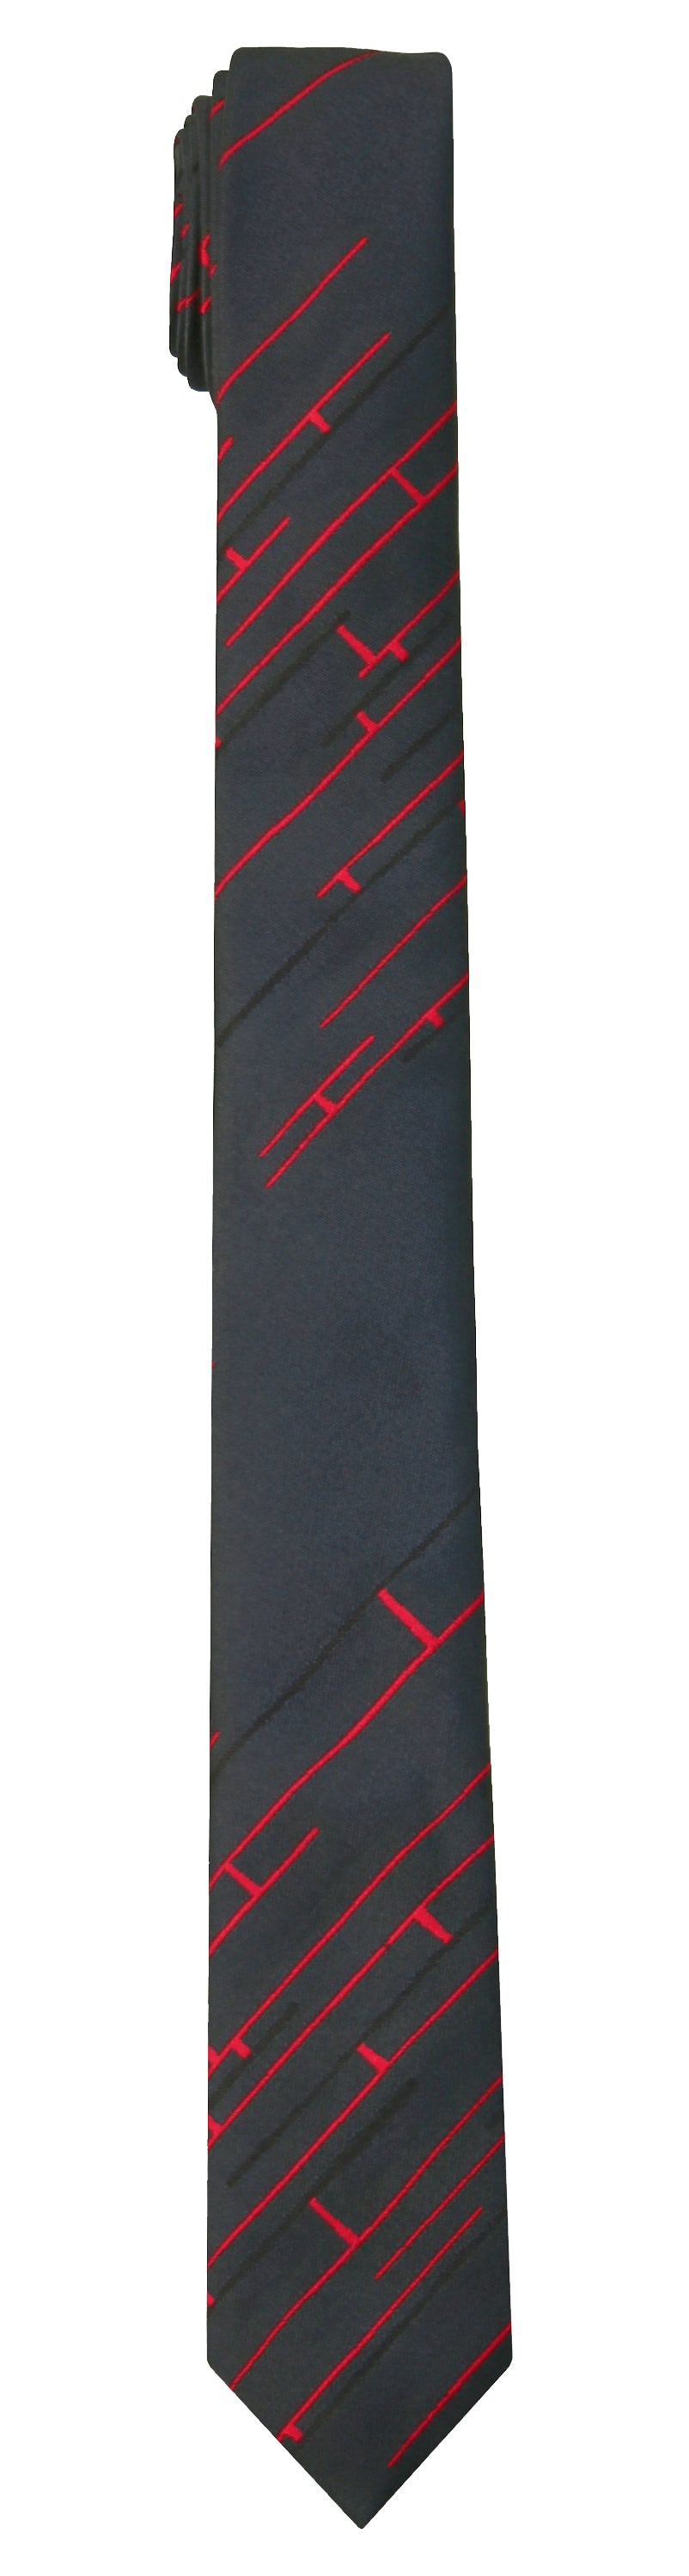 Mimi Fong Skinny Linked Tie in Charcoal